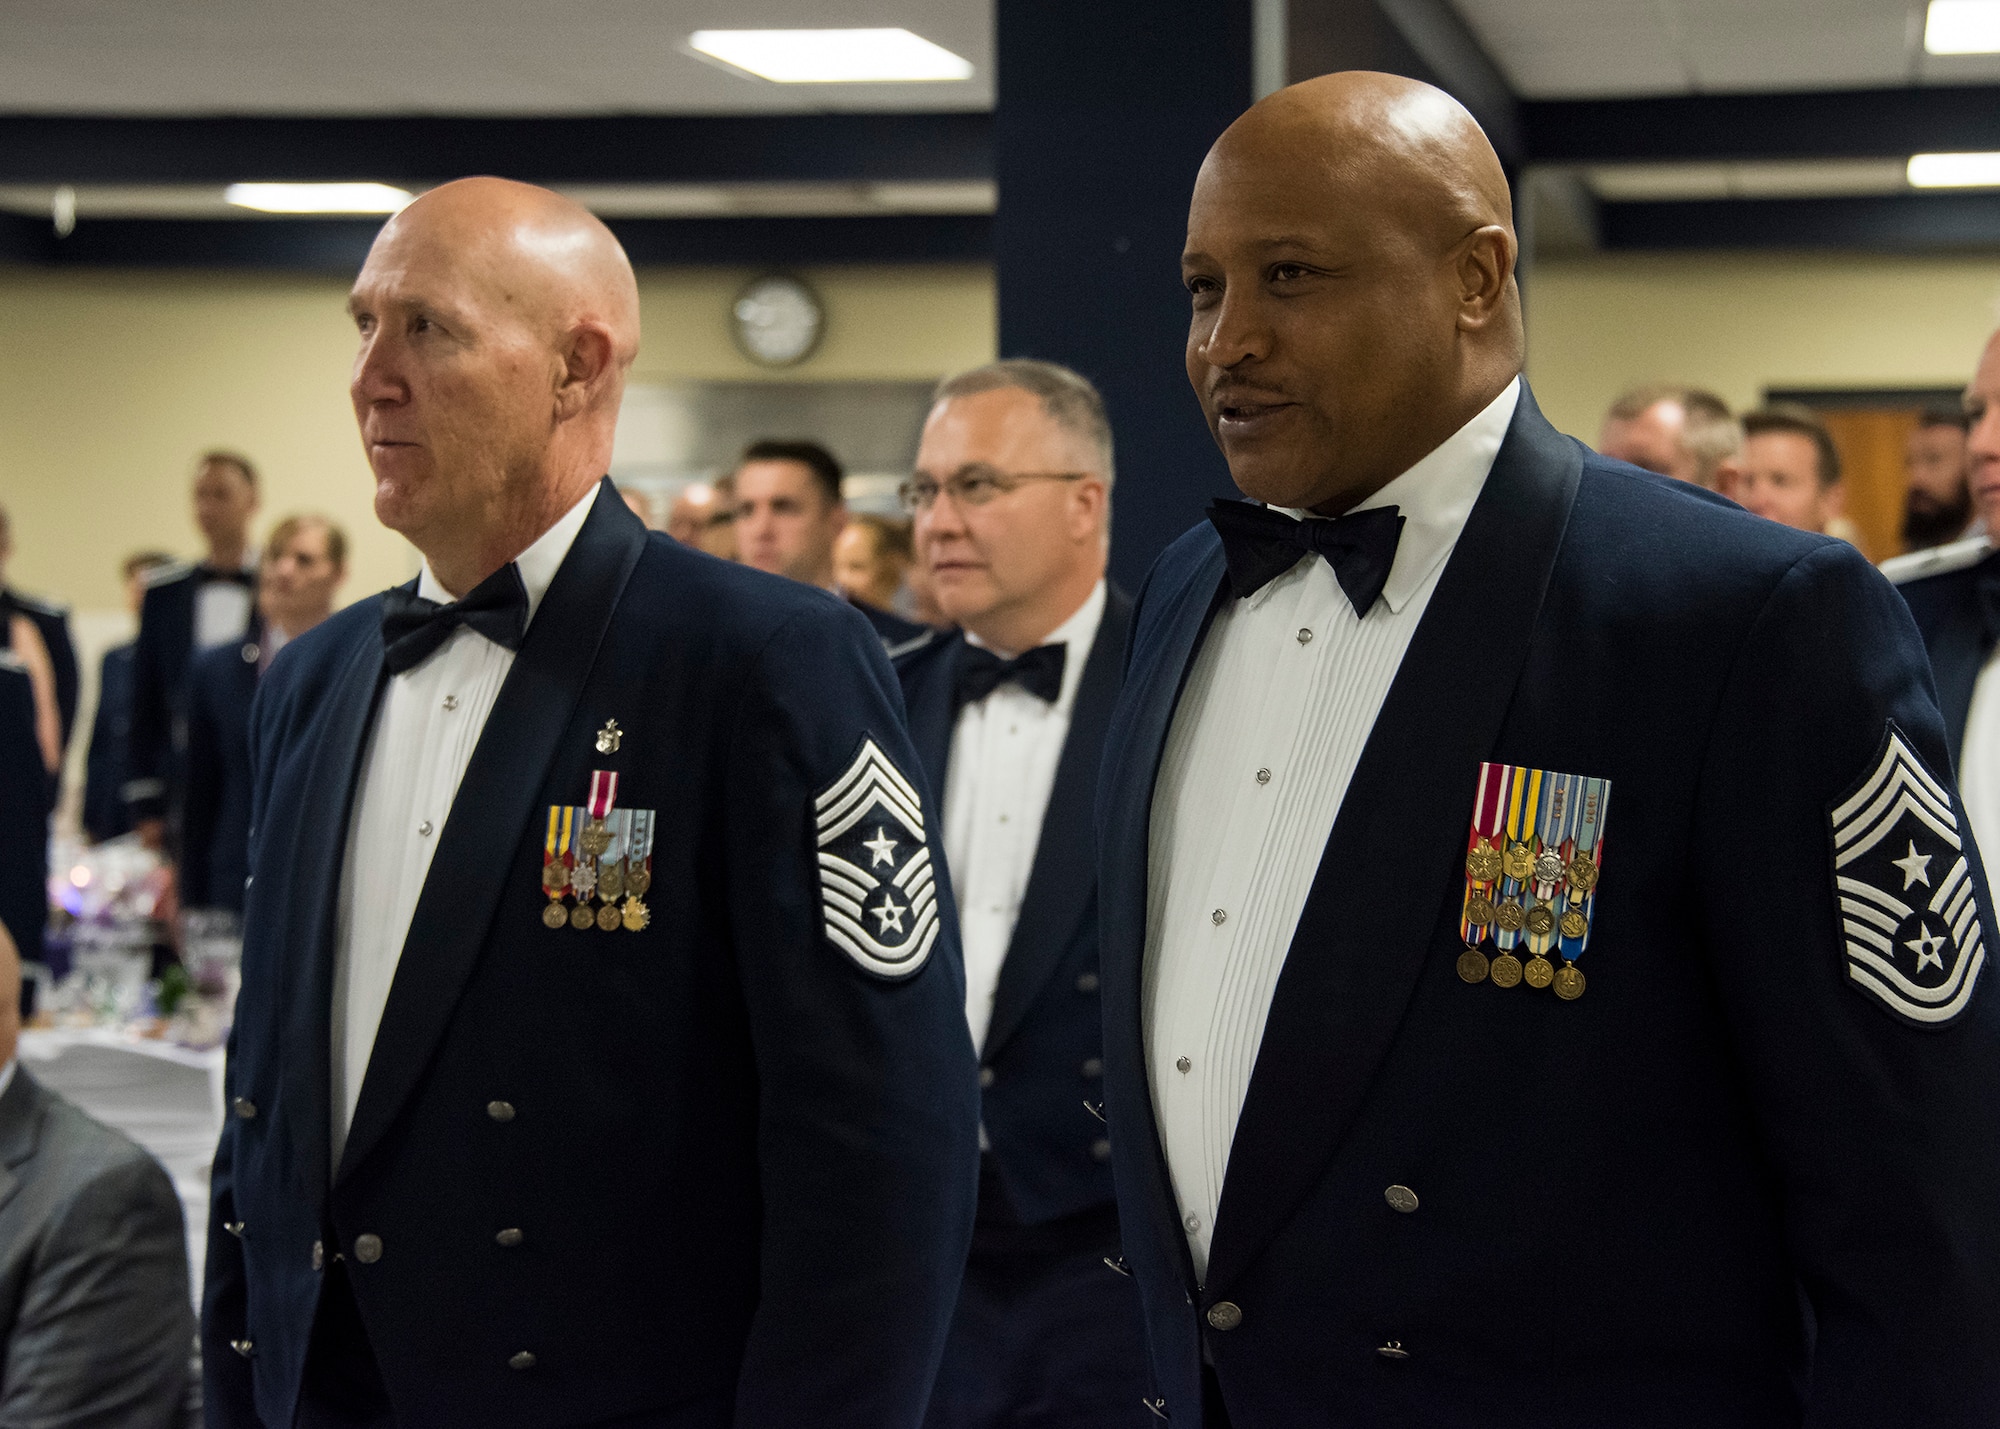 188th Wing Command Chief Master Sergeant Steven R. Bradley (left) and 189th Airlift Wing Command Chief Master Sergeant Ronald O. Boston proudly sign the Air Force Song during the 188th Wing's inaugural Senior Non-commissioned Officer Induction Ceremony, held at Ebbing Air National Guard Base, Ark., June 2, 2018. The wing celebrated the accomplishments of its newest senior NCOs during the evening's event. (U.S. Air National Guard photo by Tech. Sgt. John E. Hillier)